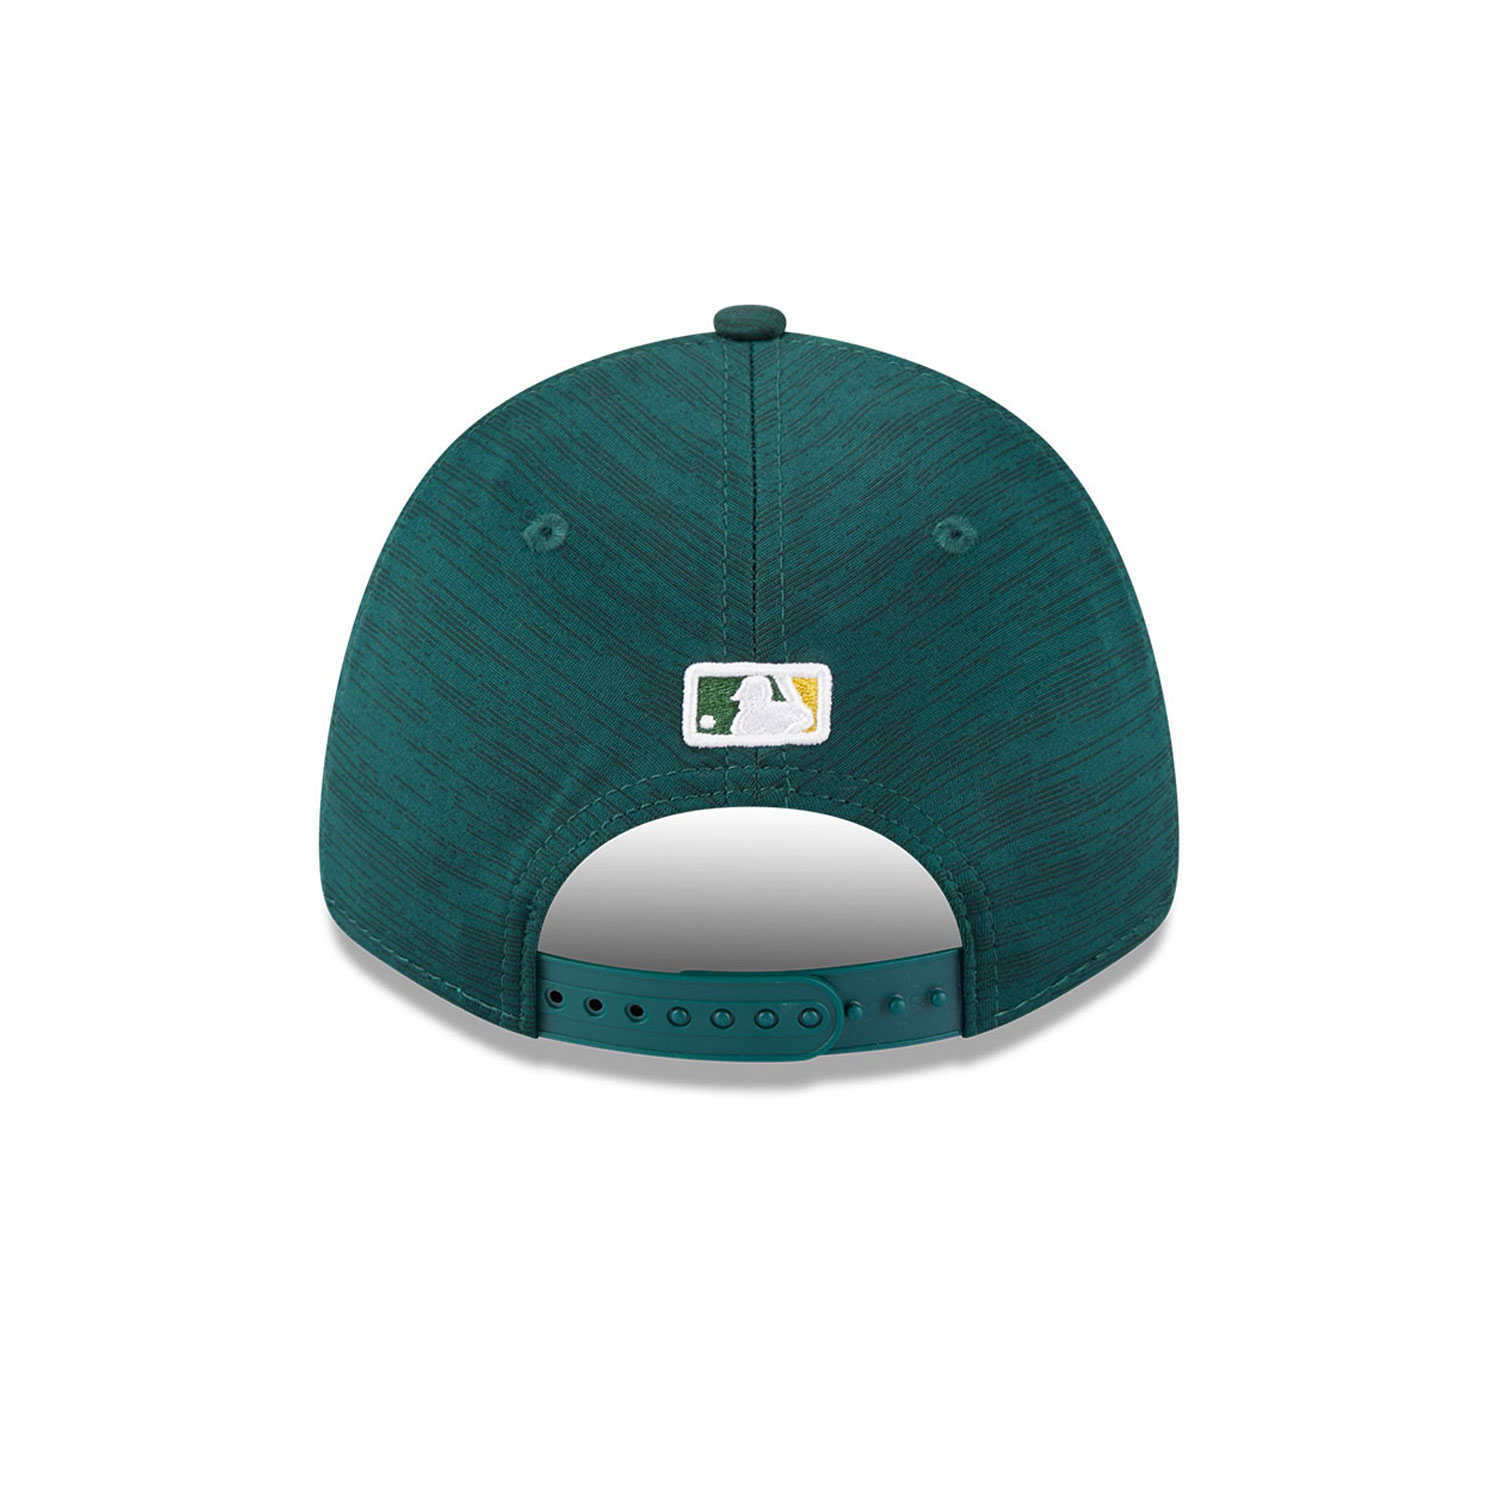 Oakland Athletics MLB Clubhouse Green 9FORTY Adjustable Cap